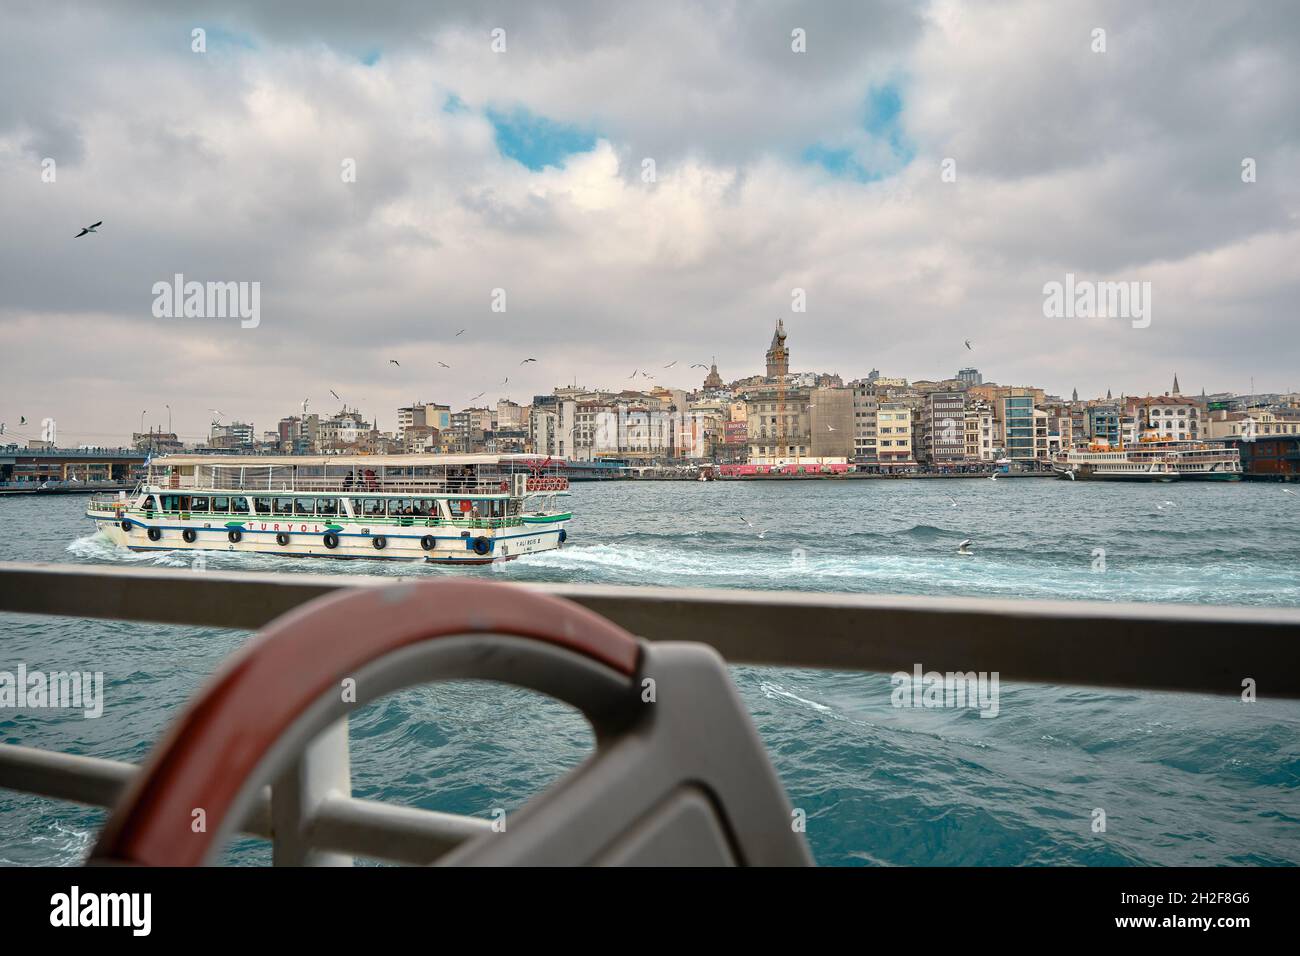 Galata tower golden horn in istanbul by taking photo from pedestrian ferry for internal transportation in istanbul during overcast weather and seagull Stock Photo